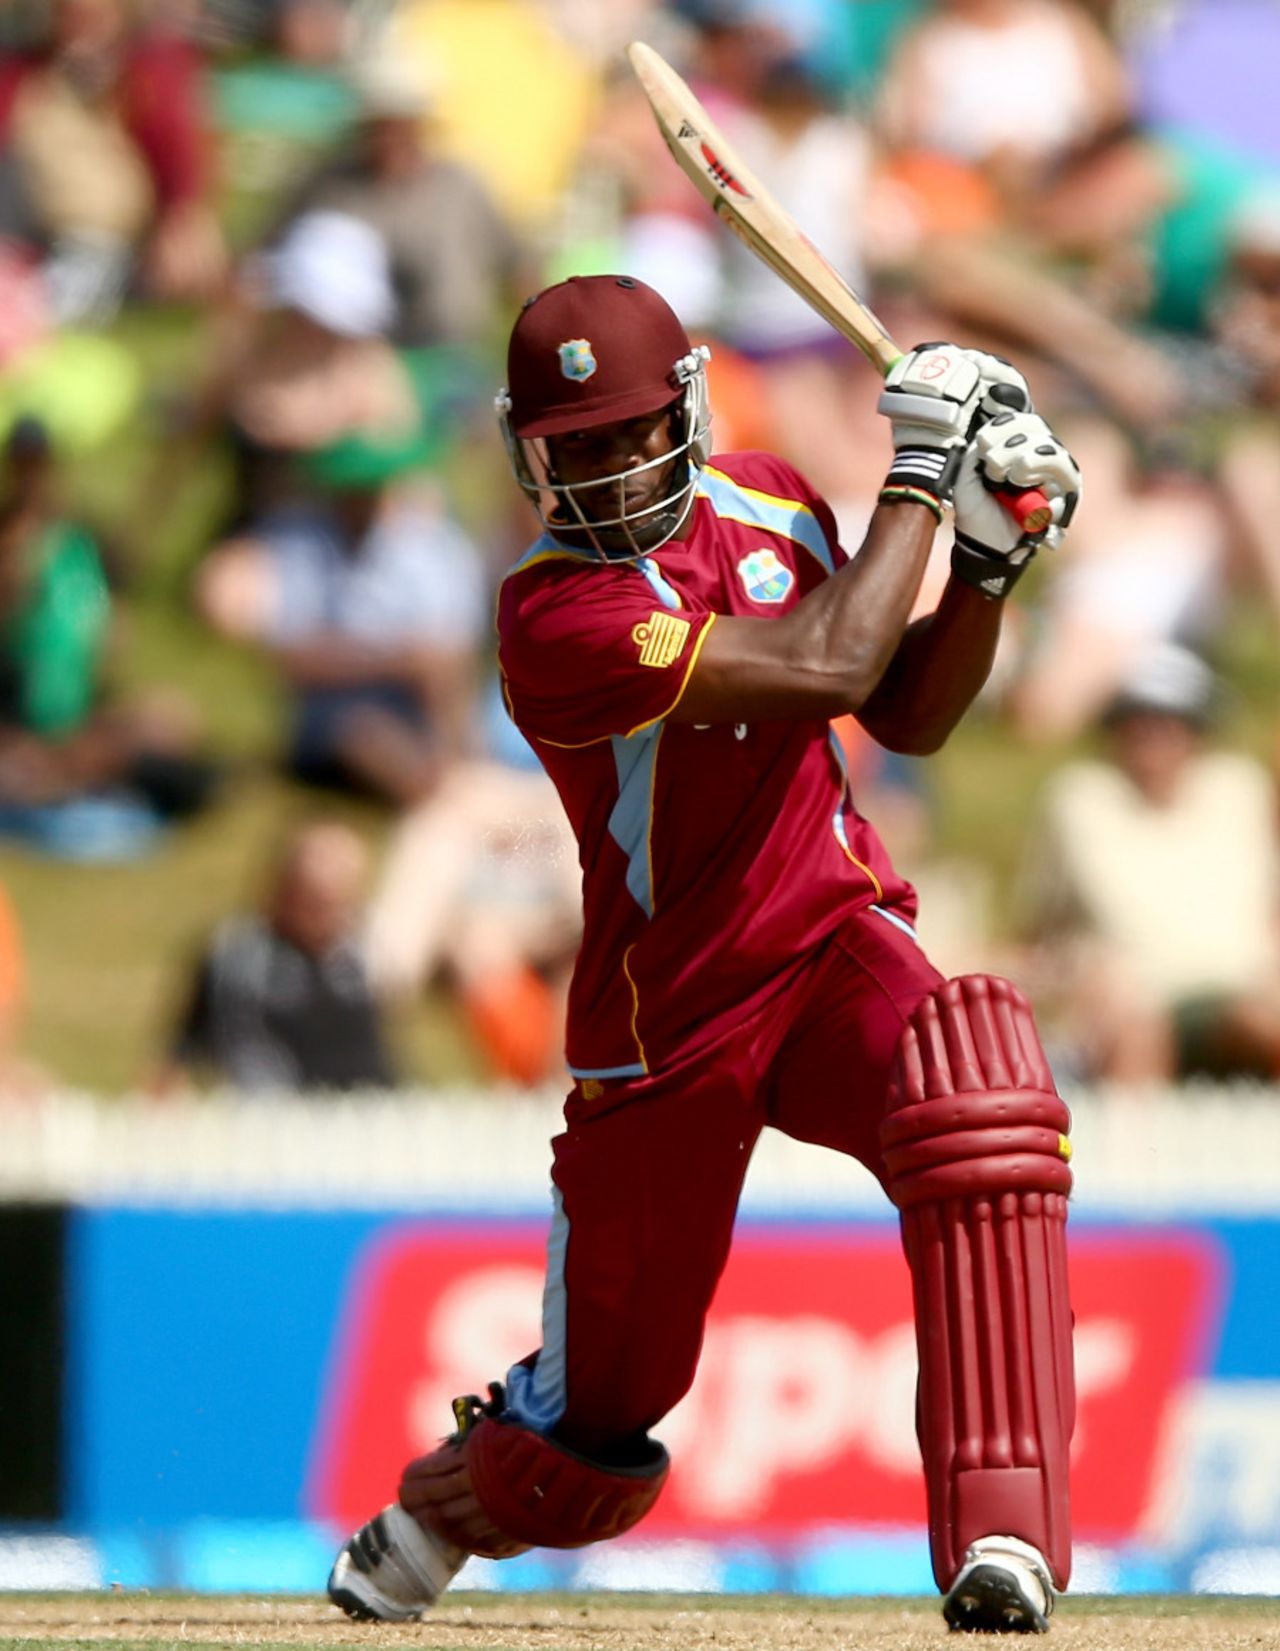 Kirk Edwards ensured West Indies built on their rapid start, New Zealand v West Indies, 5th ODI, Hamilton, January 8, 2013